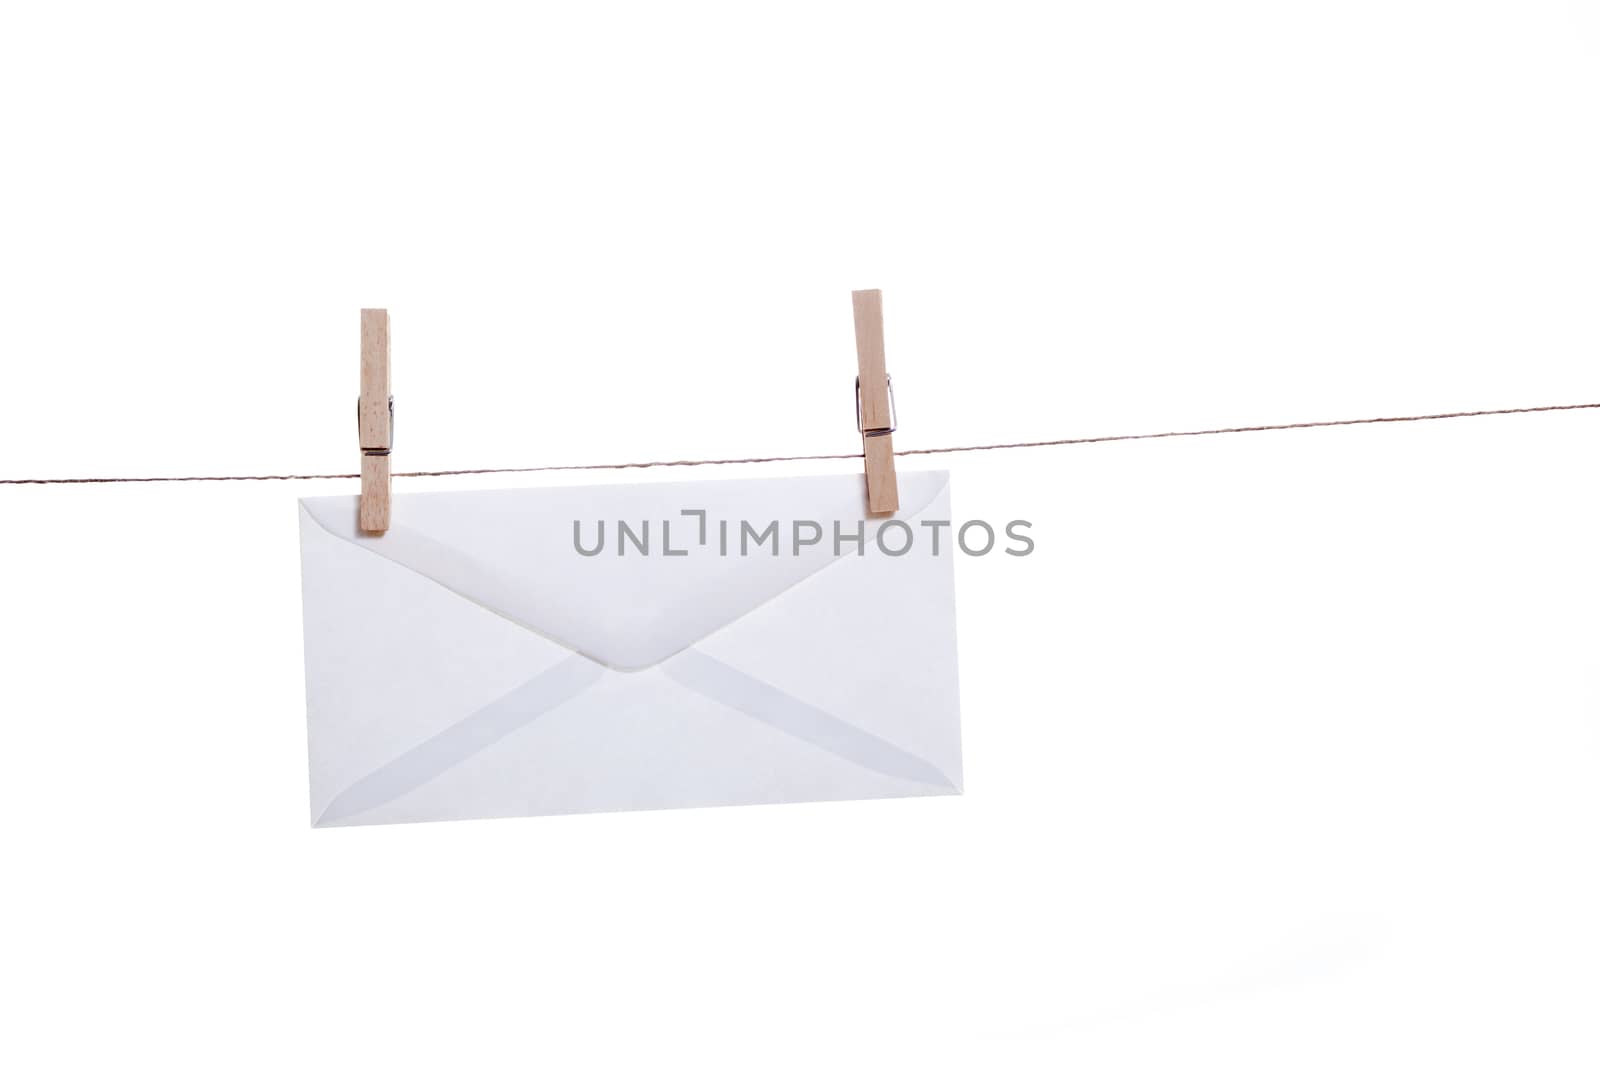 Envelope held by clothespins on a string